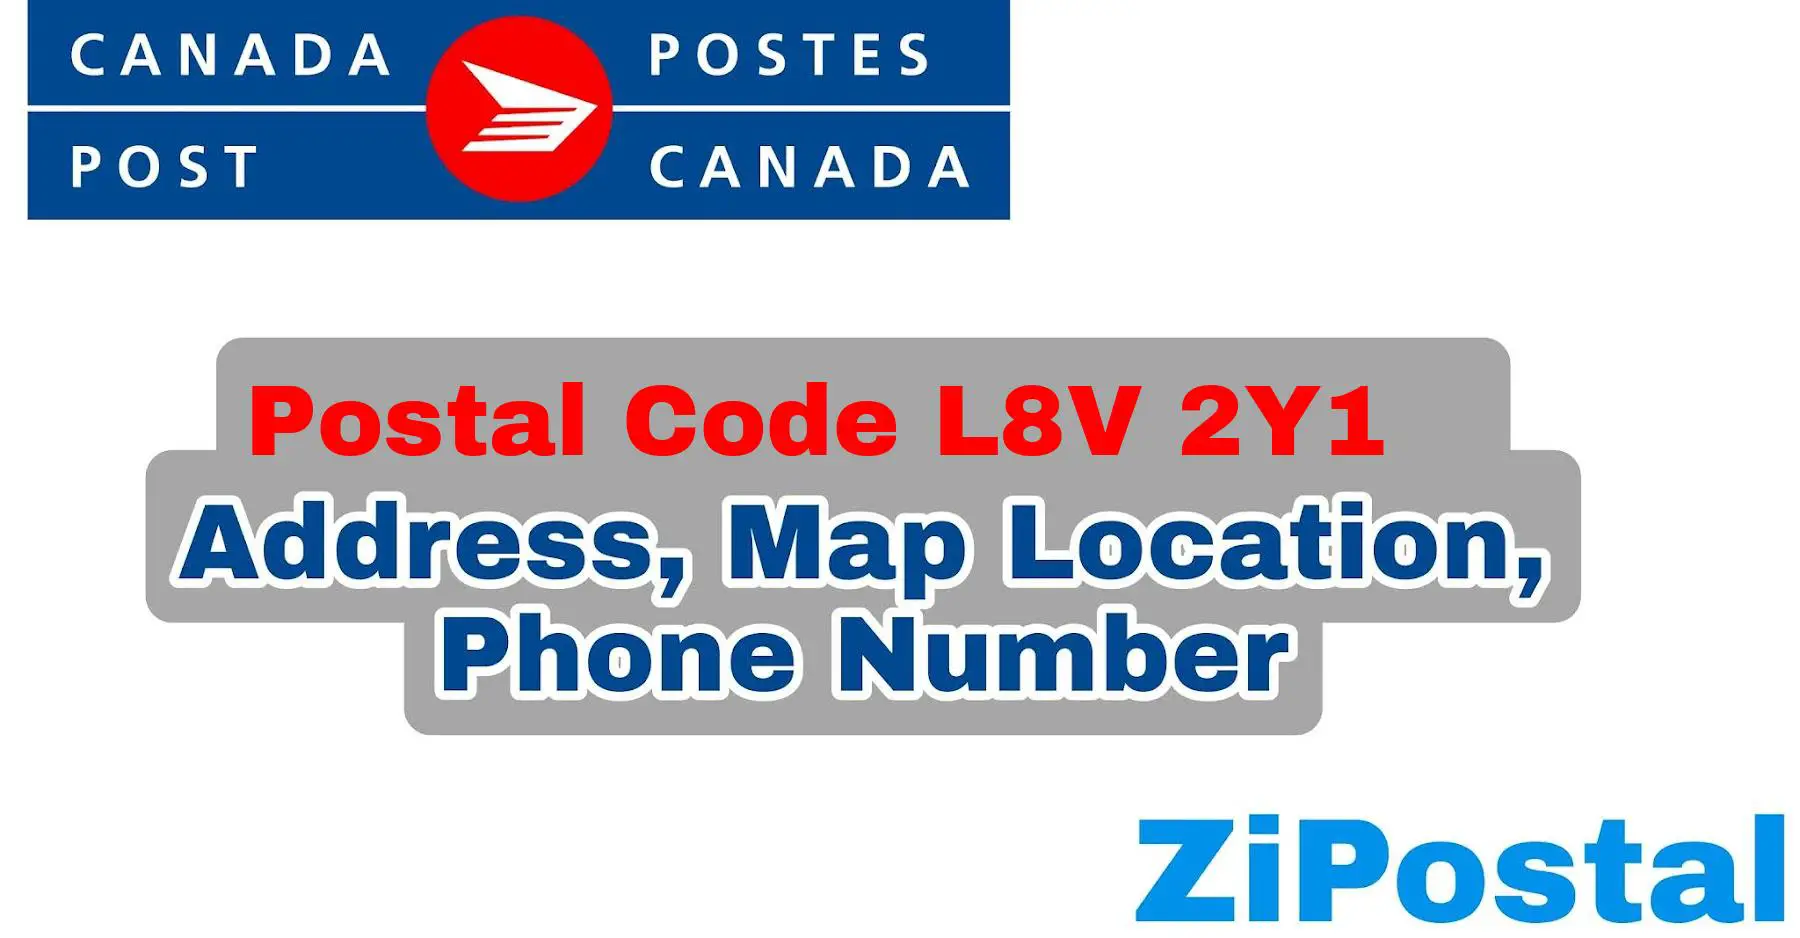 Postal Code L8V 2Y1 Address Map Location and Phone Number